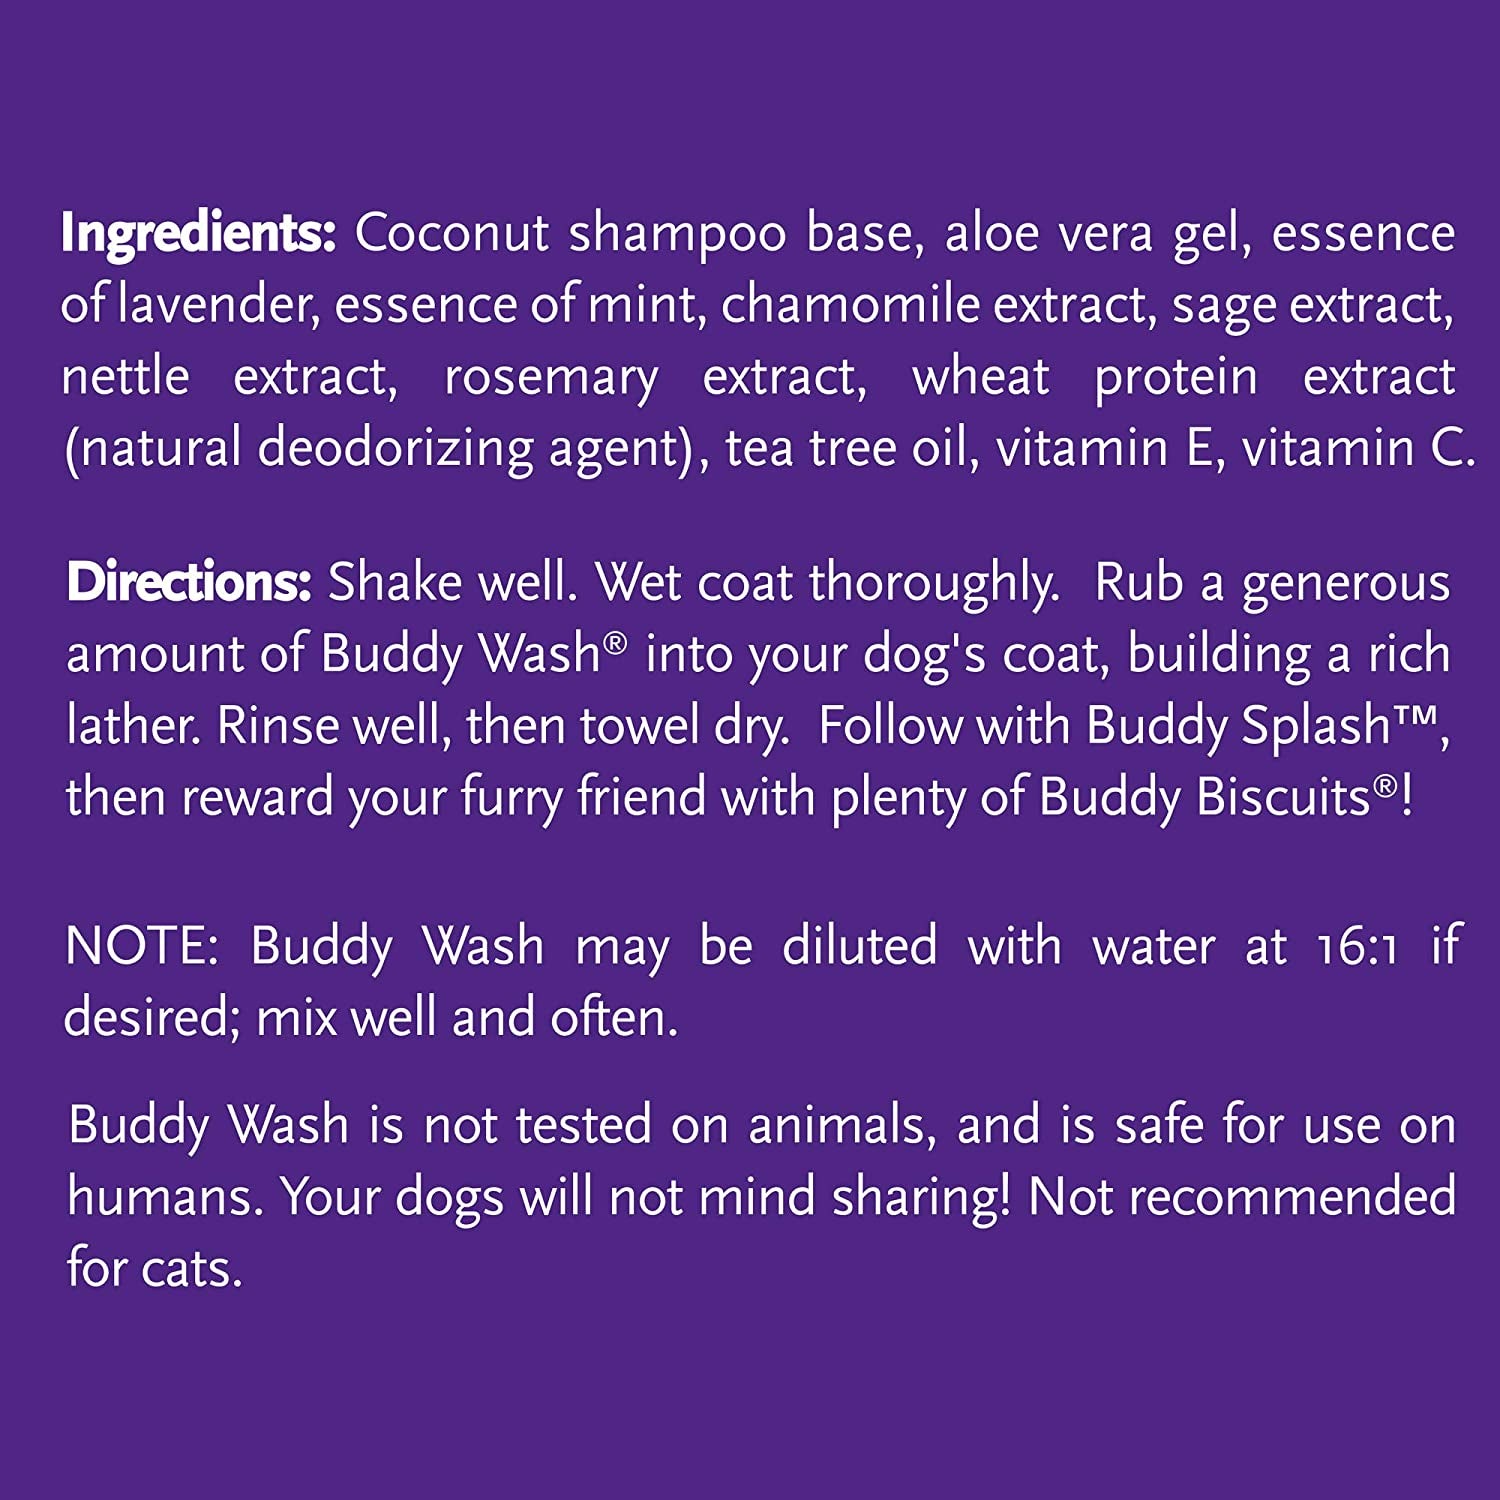 Buddy Wash 2-In-1 Dog Shampoo and Conditioner for Dog Grooming, Lavender & Mint, 1 Gal. Bottle